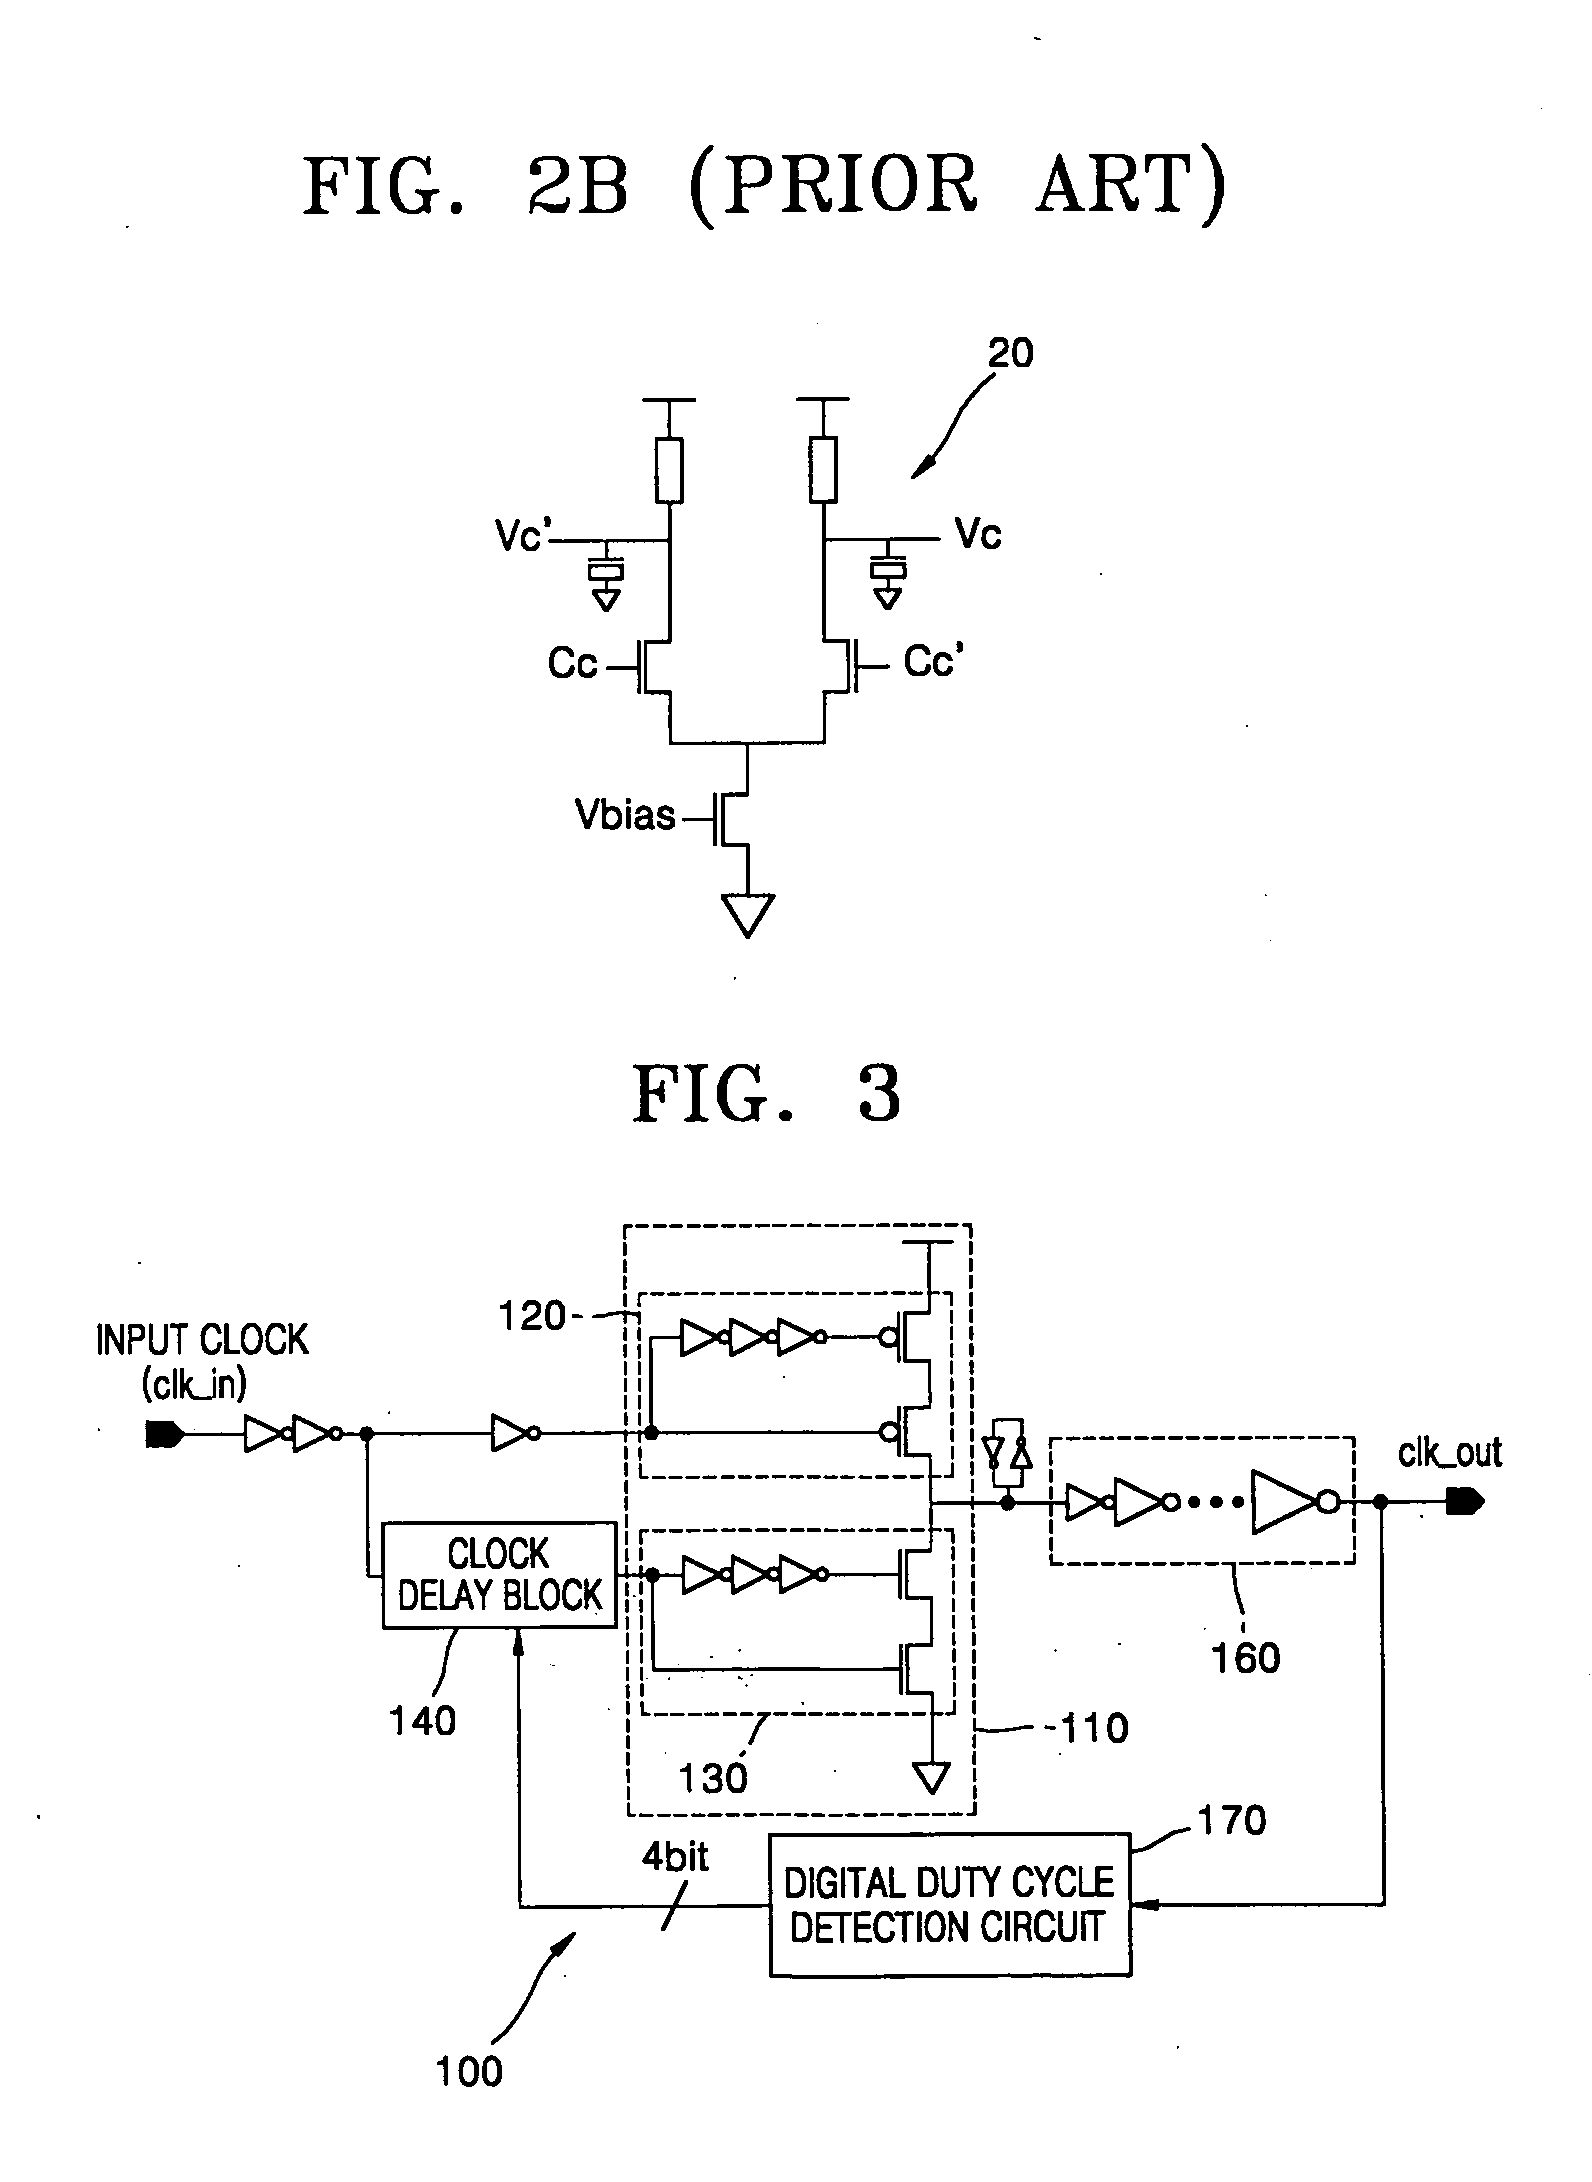 Digital duty cycle correction circuit and method for multi-phase clock